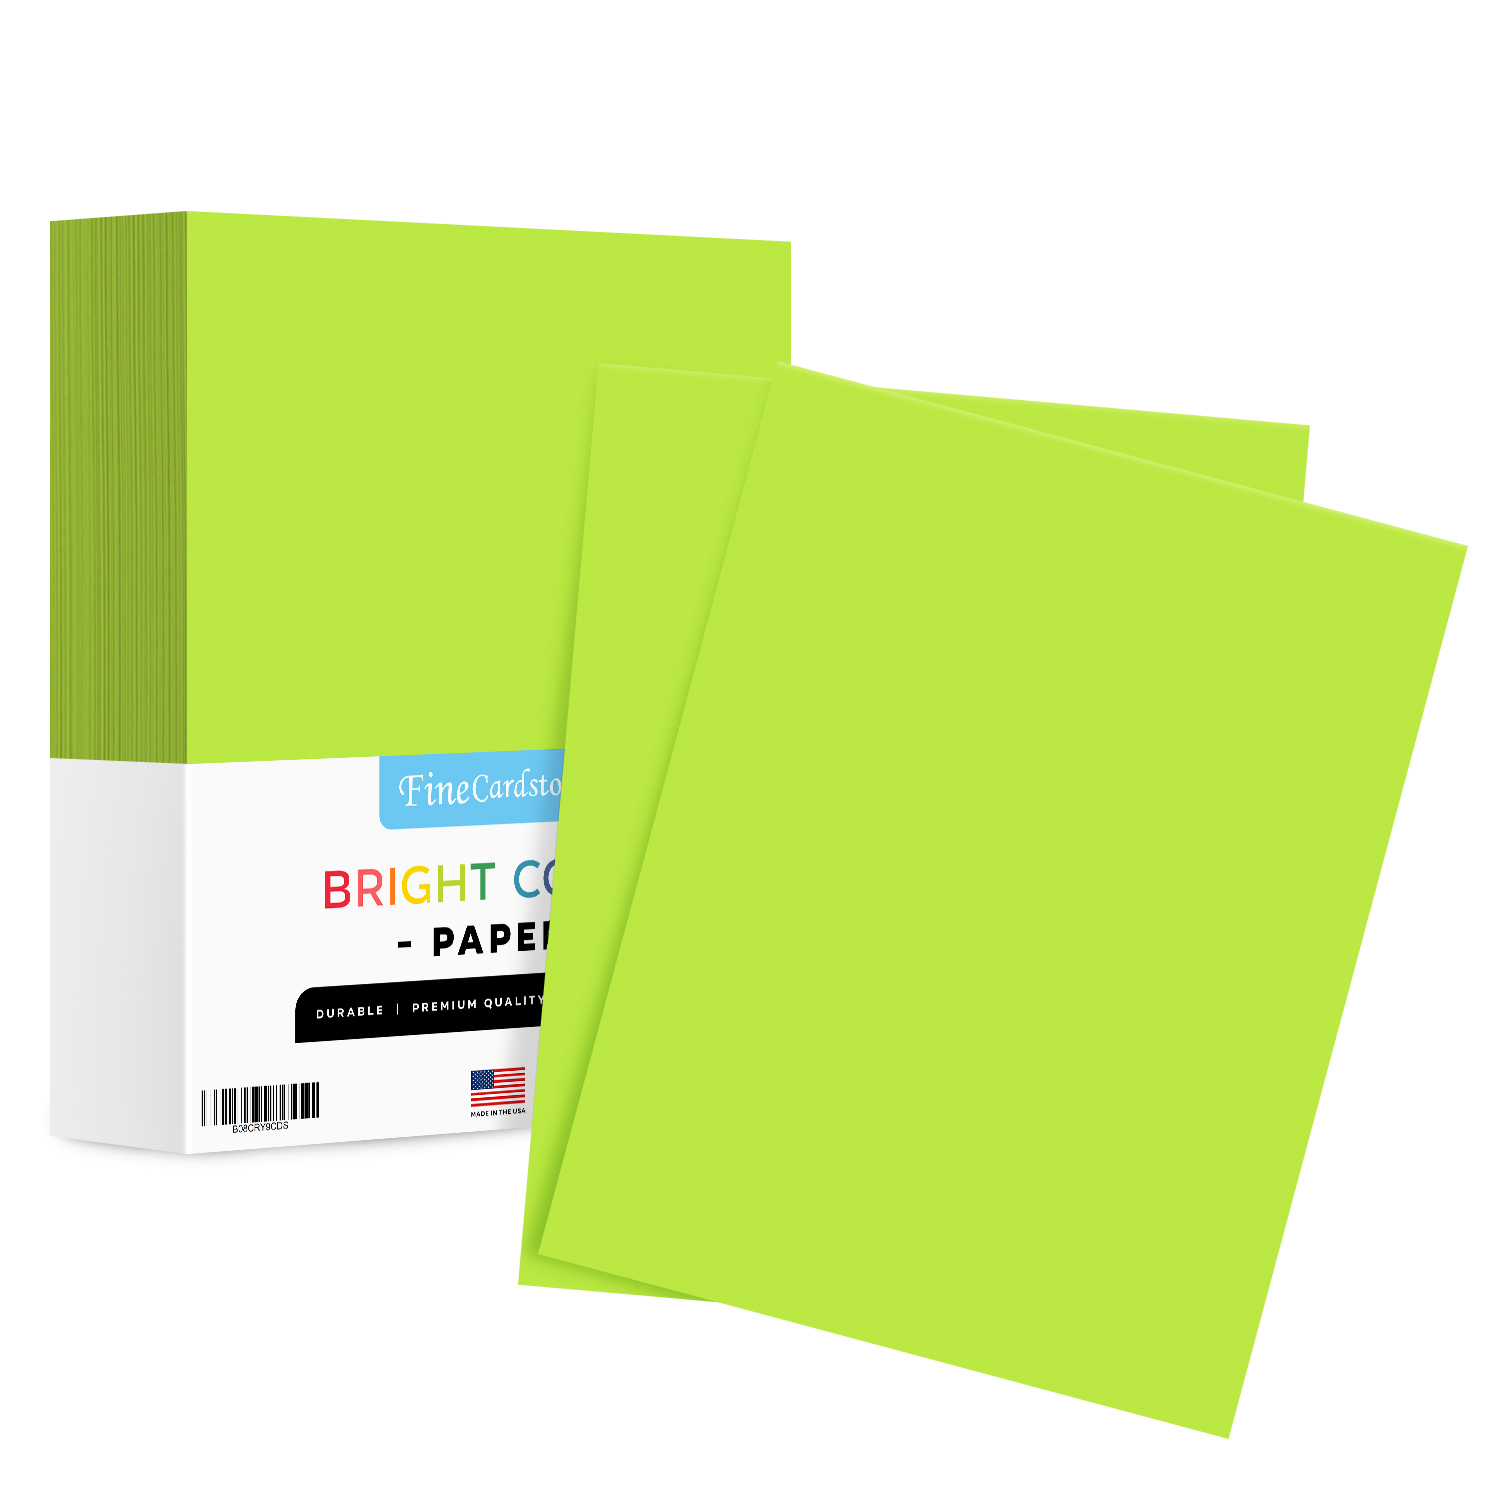 8.5 x 11 Vulcan Green Color Paper Smooth, for School, Office